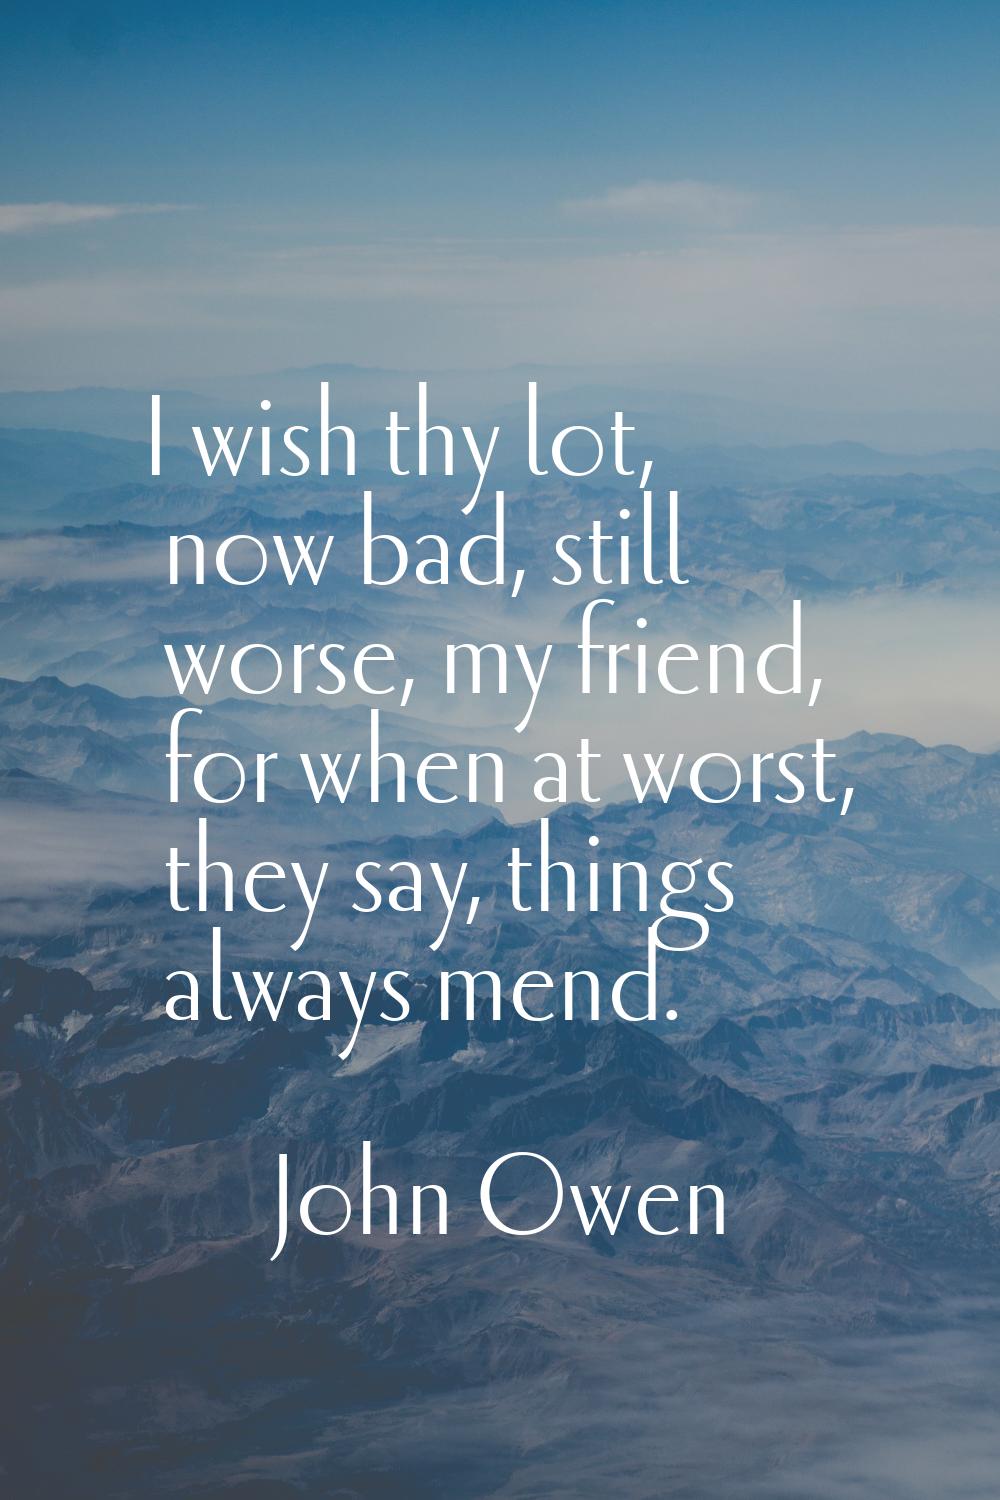 I wish thy lot, now bad, still worse, my friend, for when at worst, they say, things always mend.